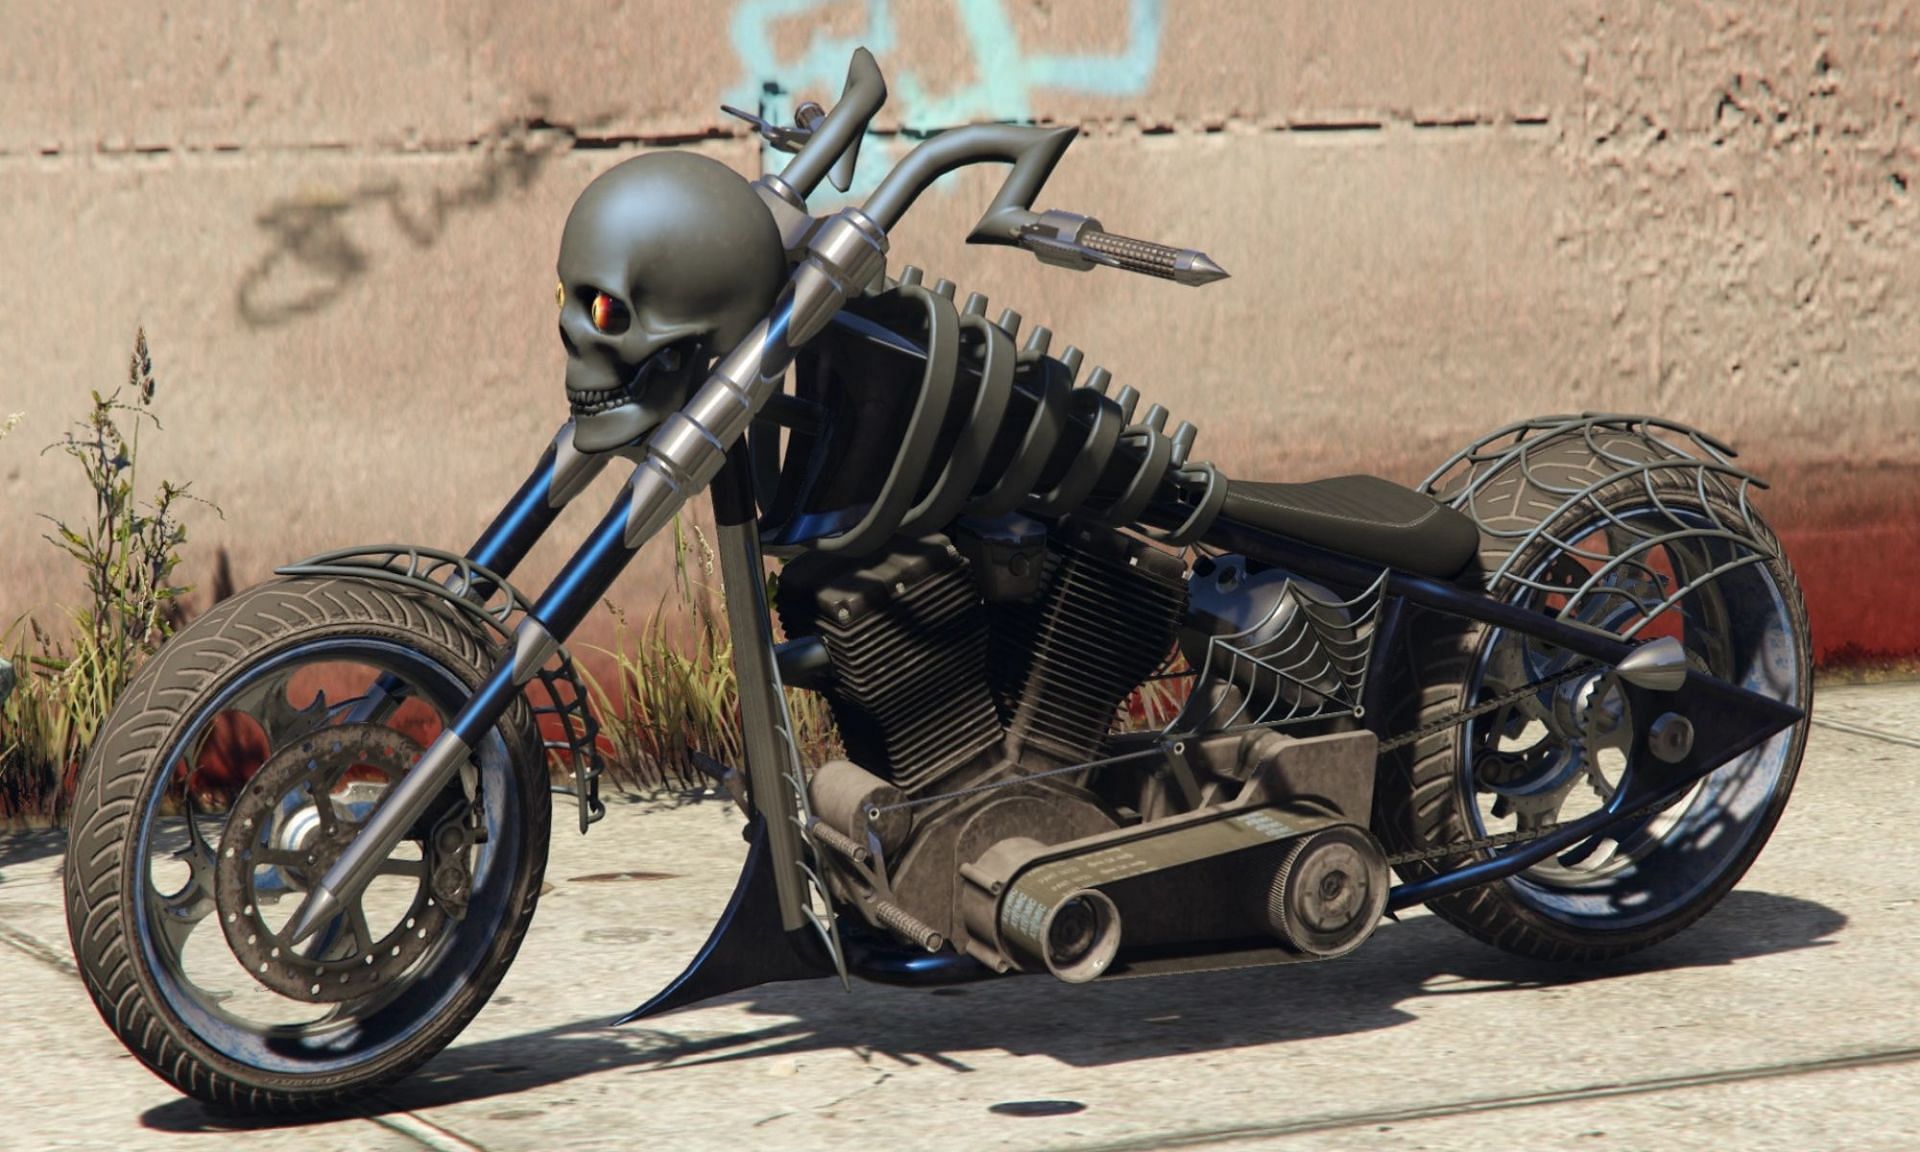 Here’s how GTA Online players can get a free LCC Sanctus motorcycle